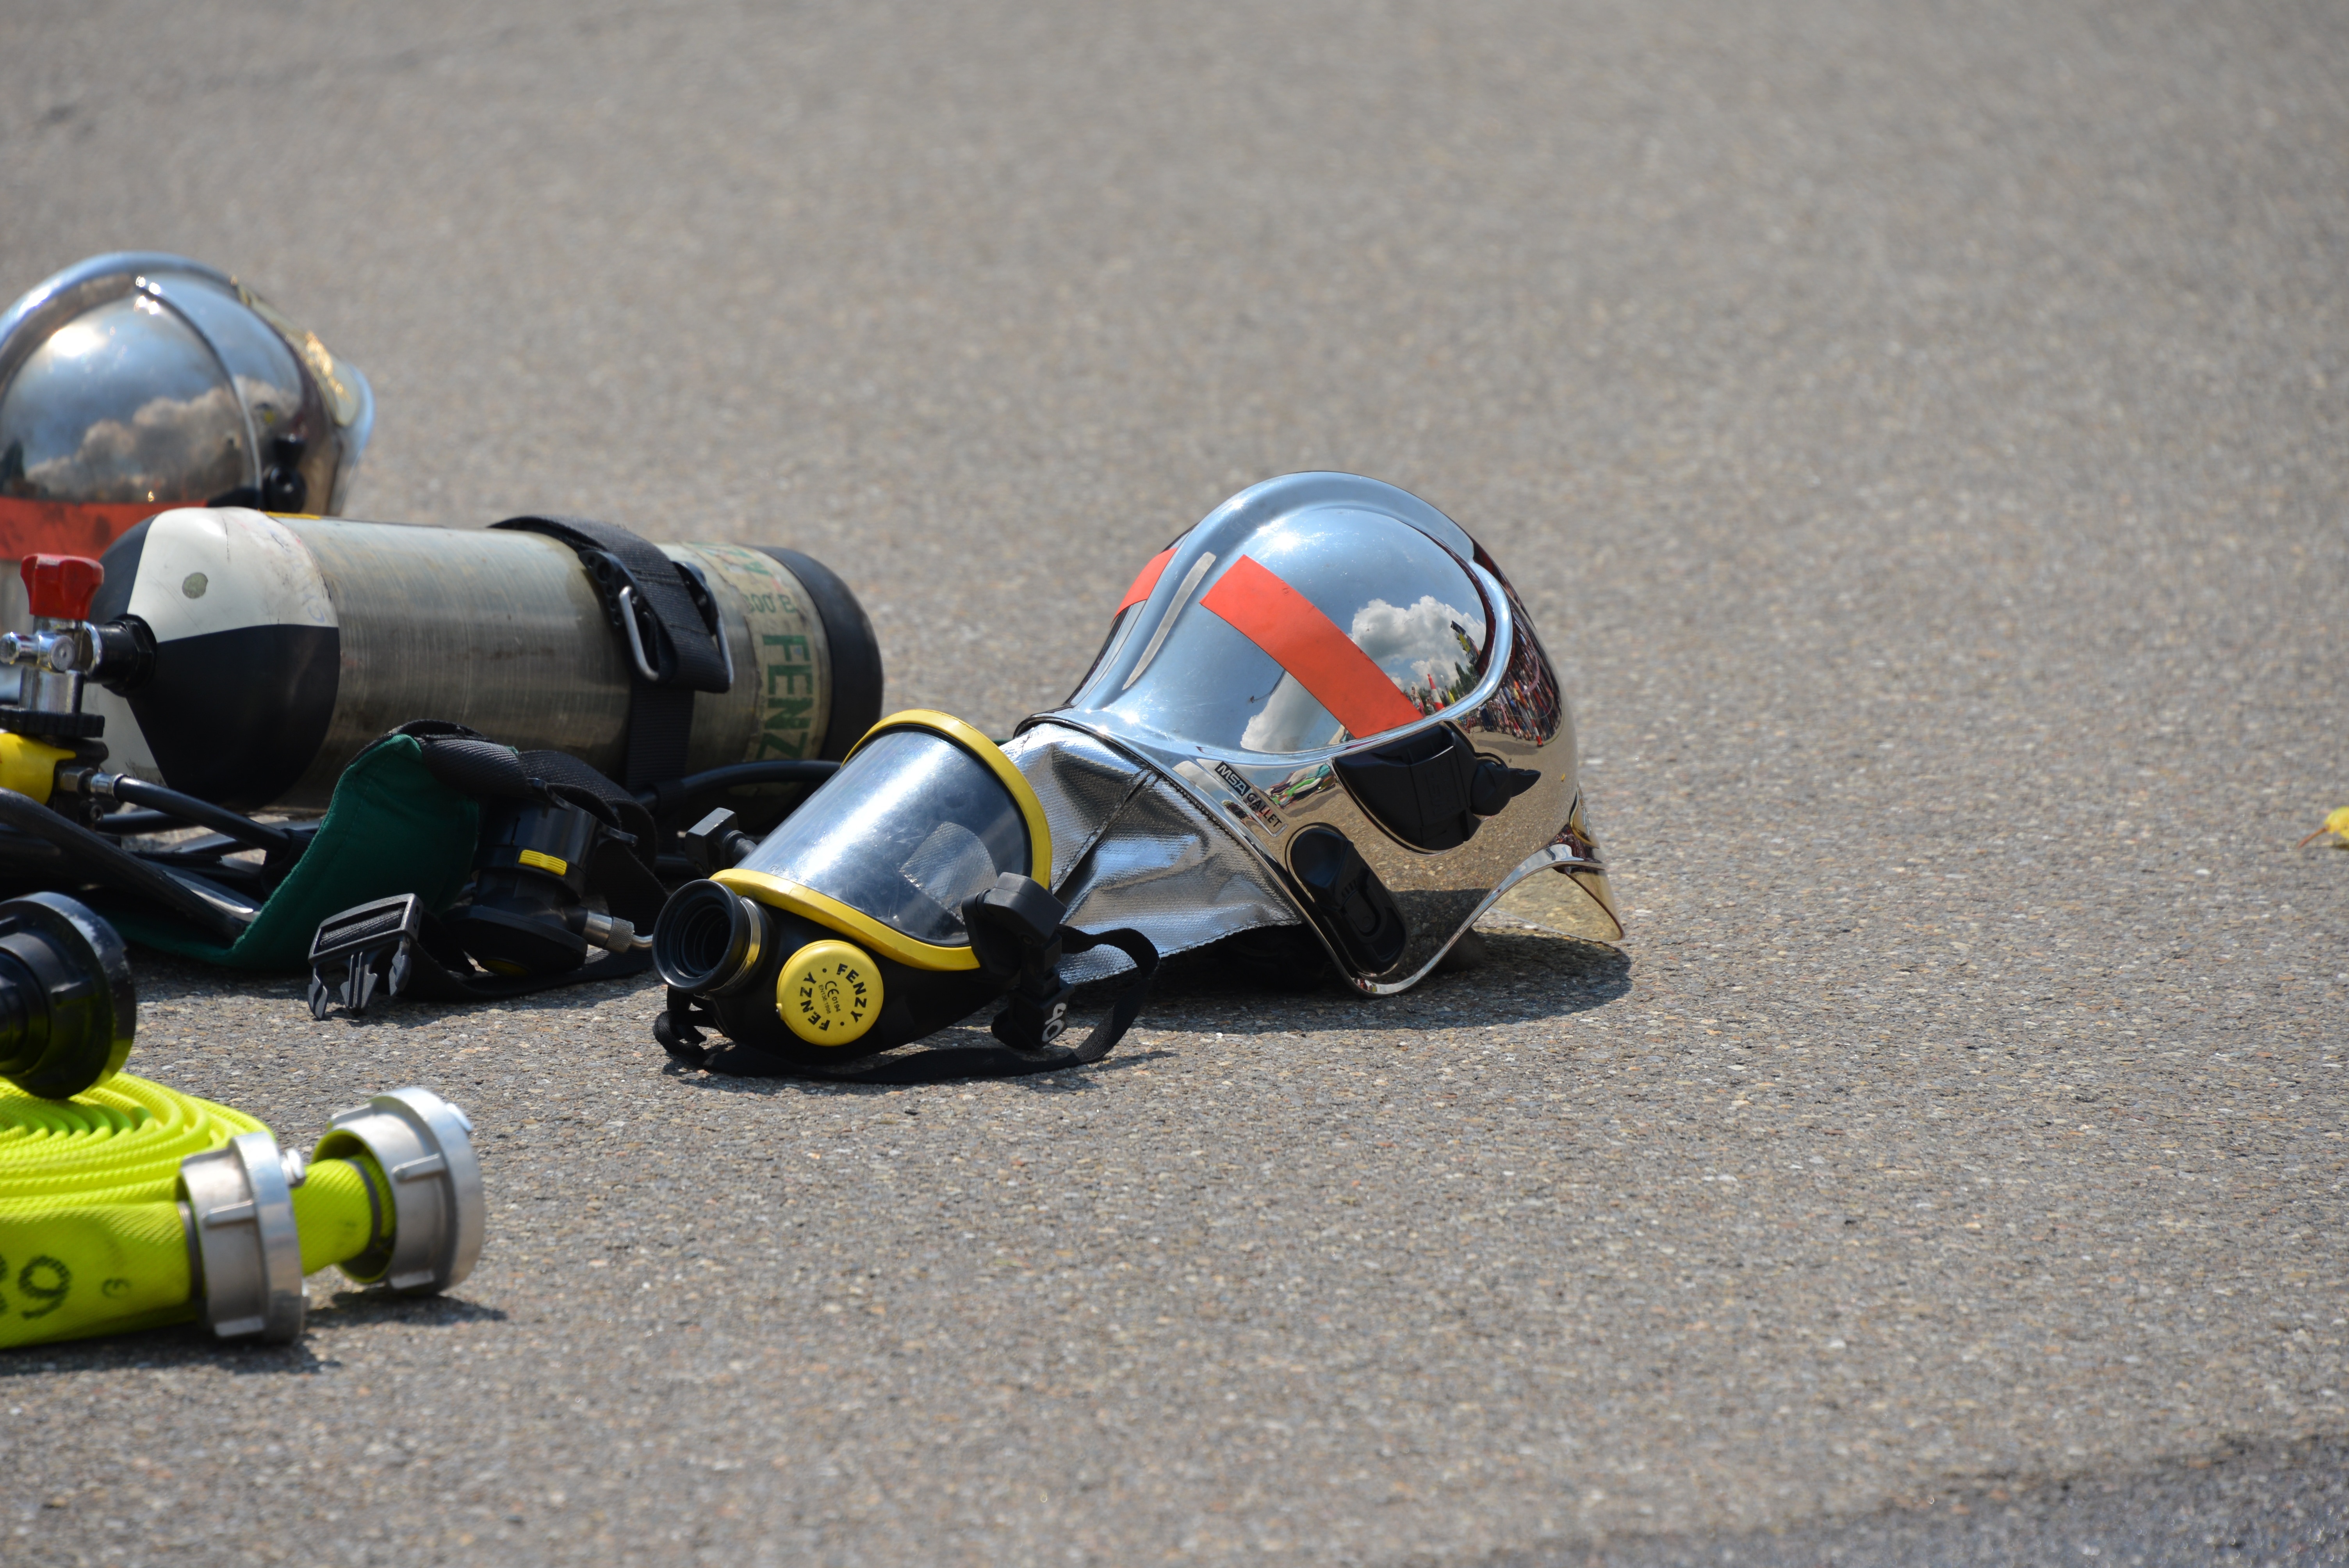 Gas Mask, Respiratory Protection, Fire, street, road